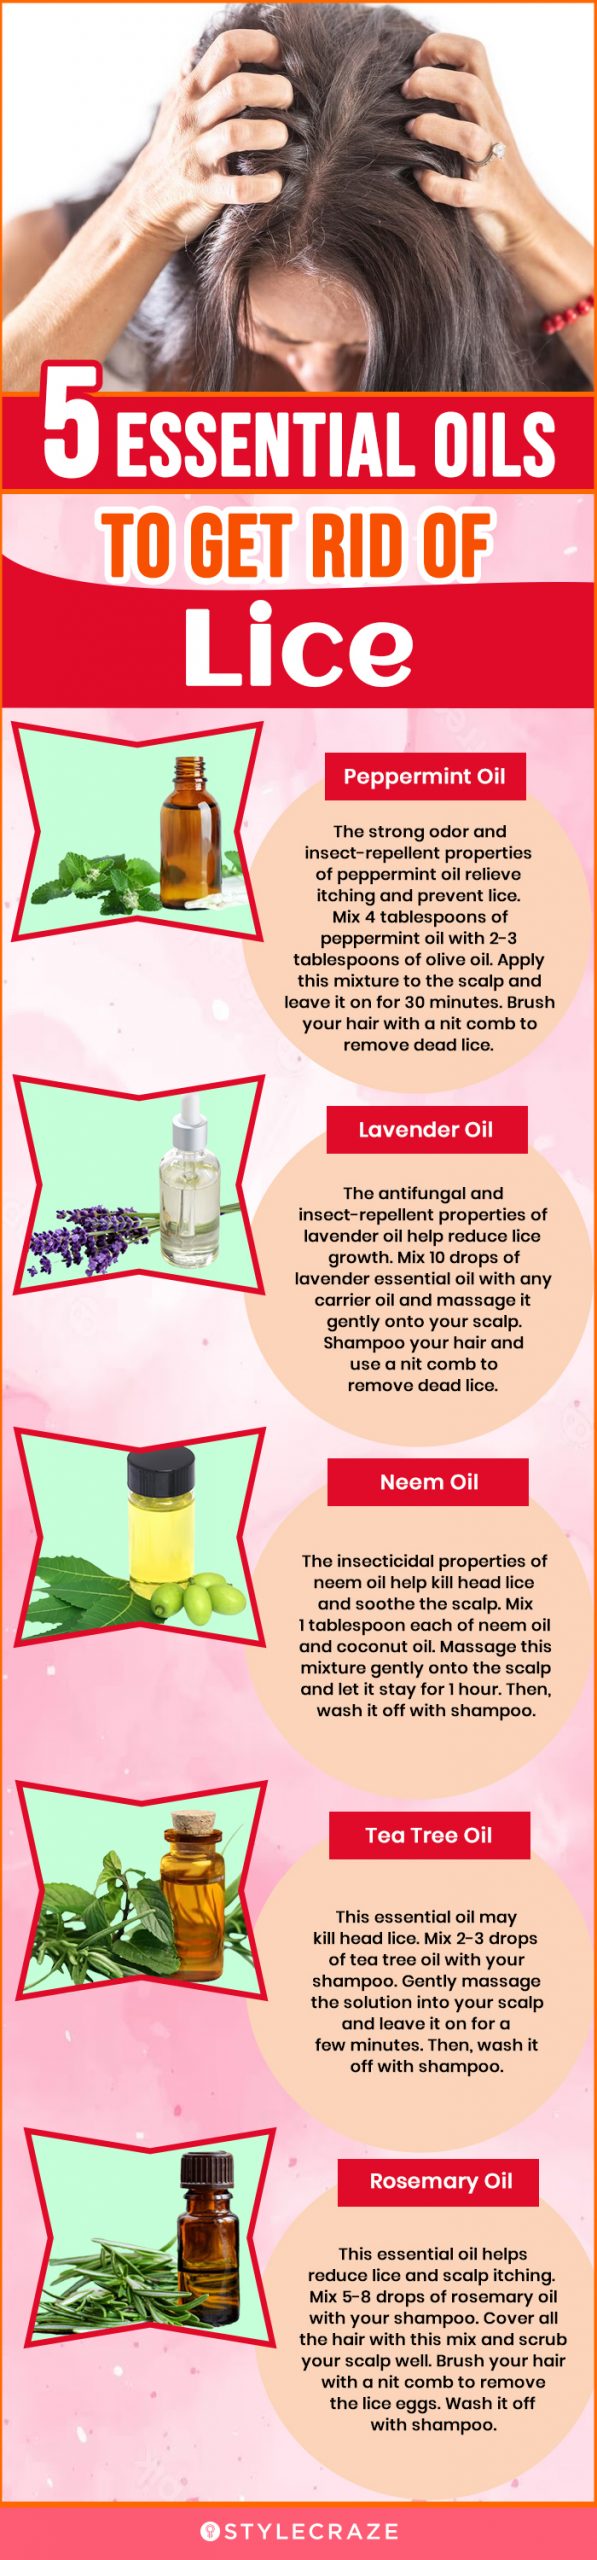 Aggregate more than 161 neem oil for hair lice latest